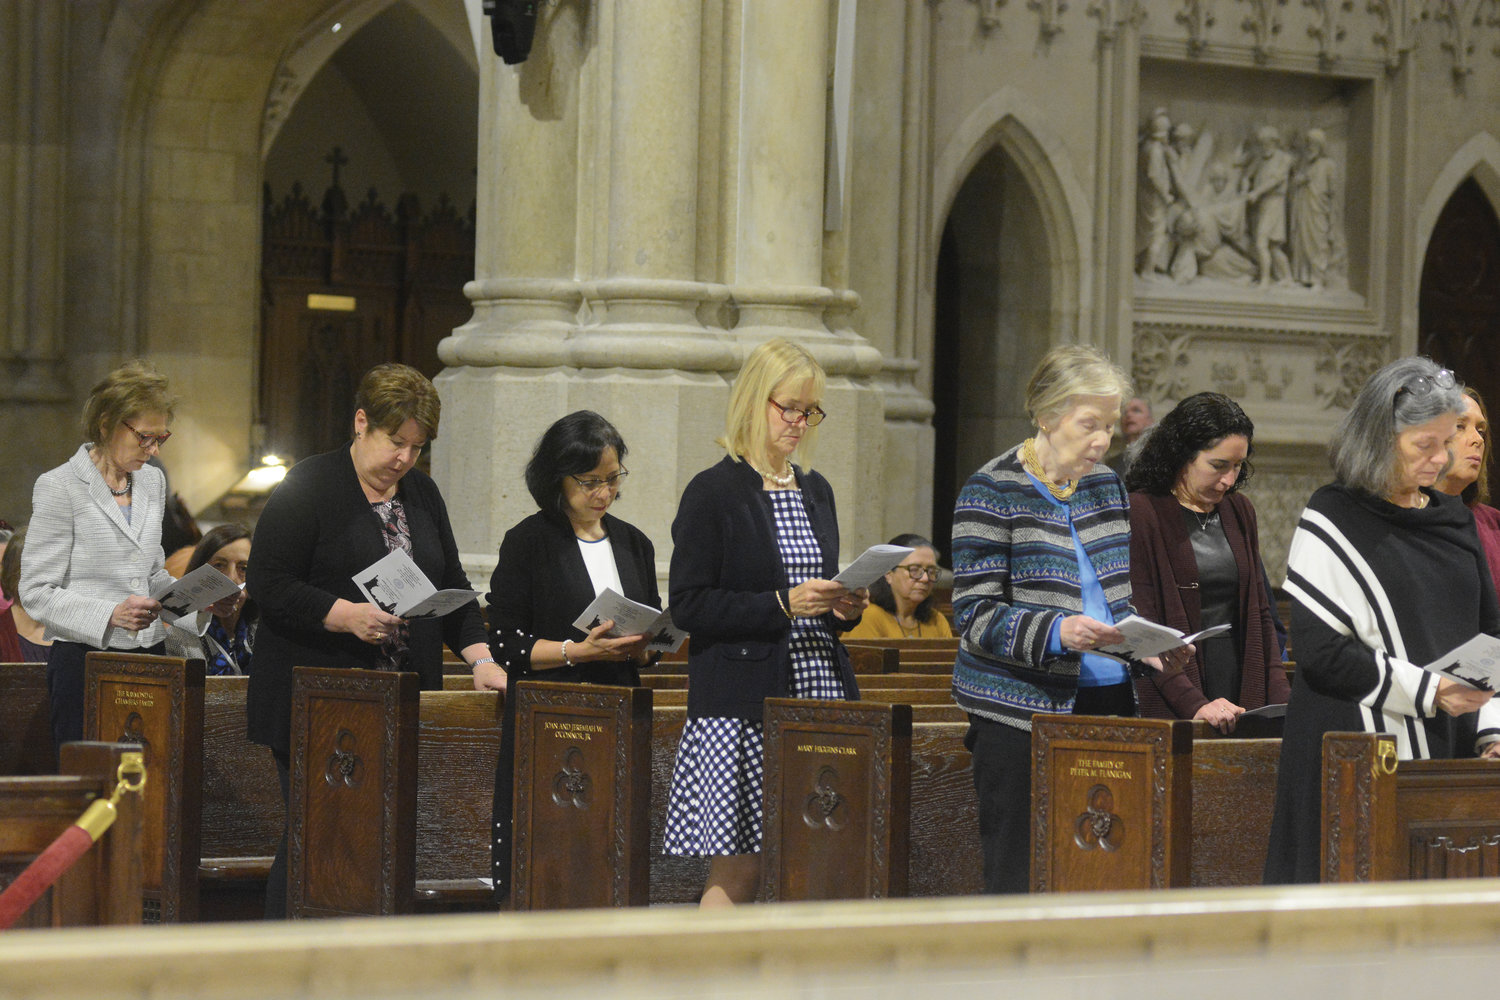 Congregants participate in the Ladies of Charity Mass and Affiliation Nov. 5 at St. Patrick’s Cathedral.